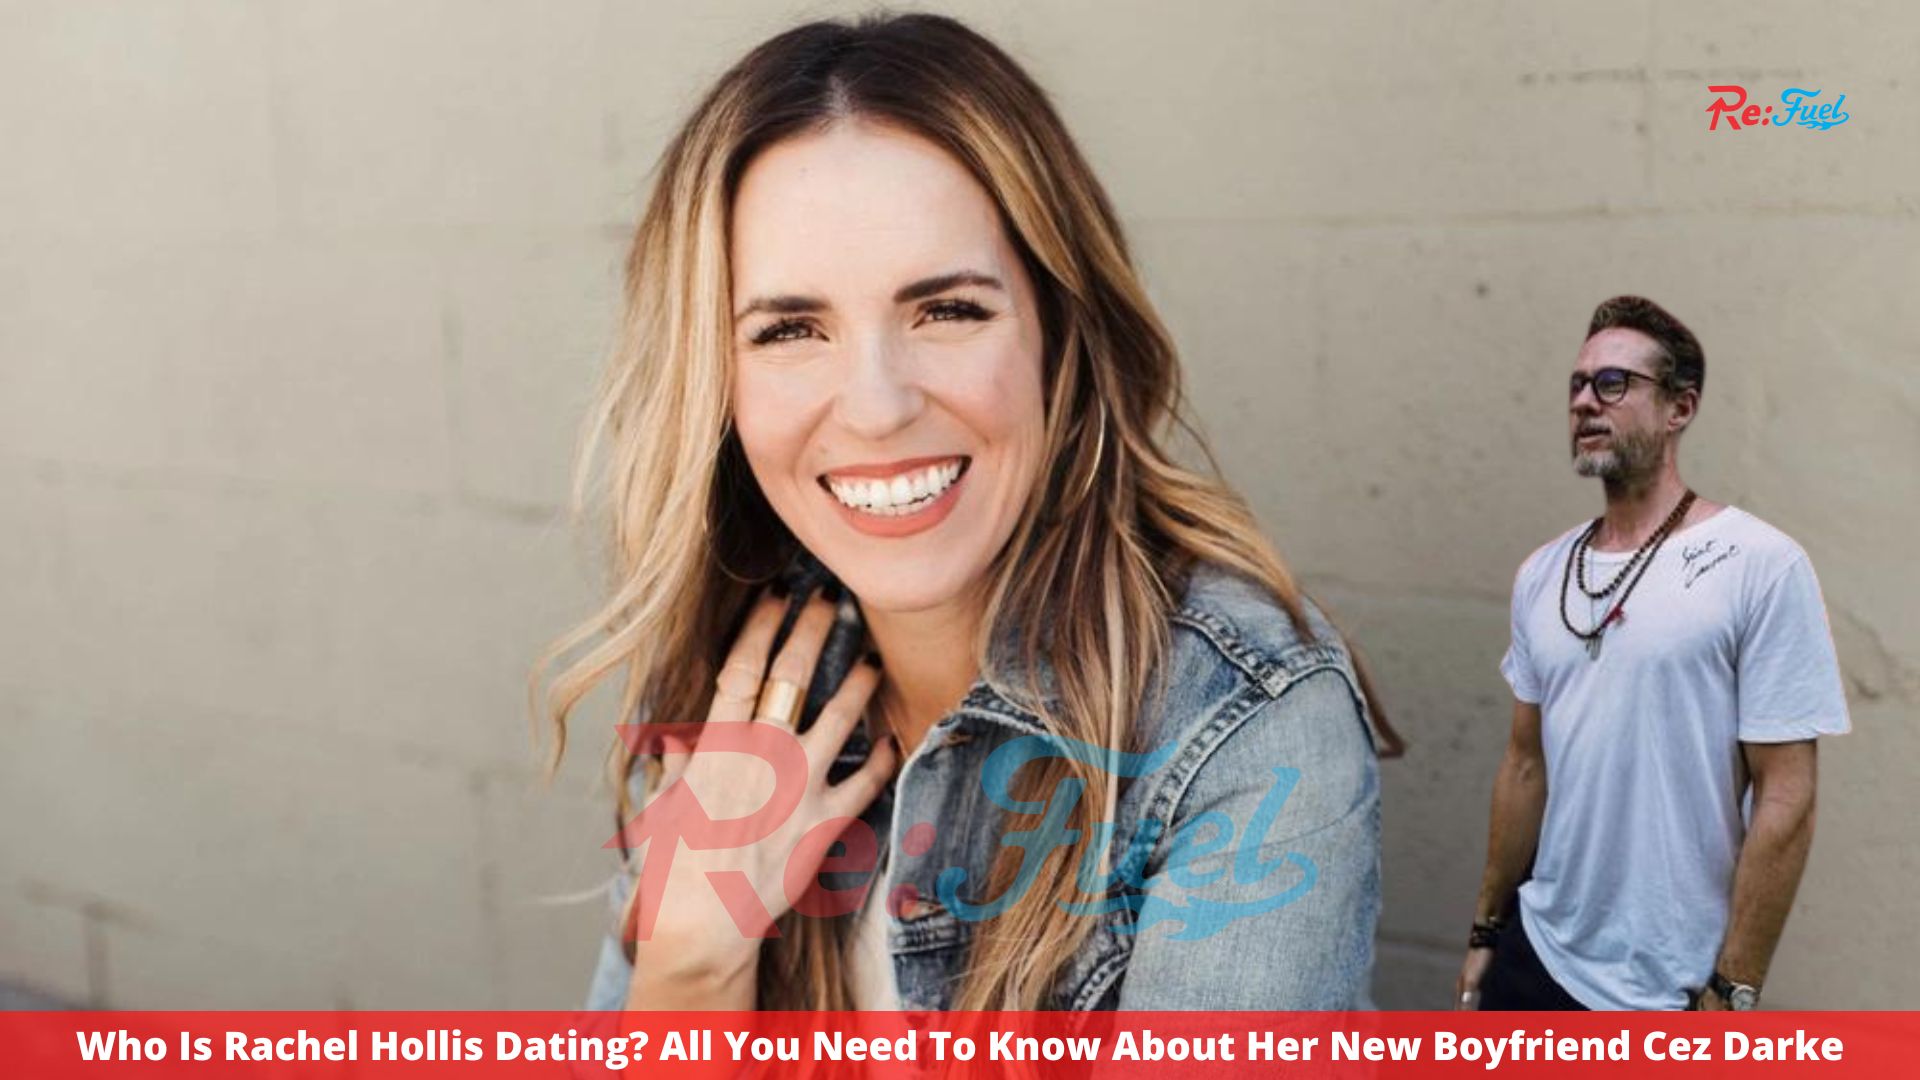 Who Is Rachel Hollis Dating? All You Need To Know About Her New Boyfriend Cez Darke